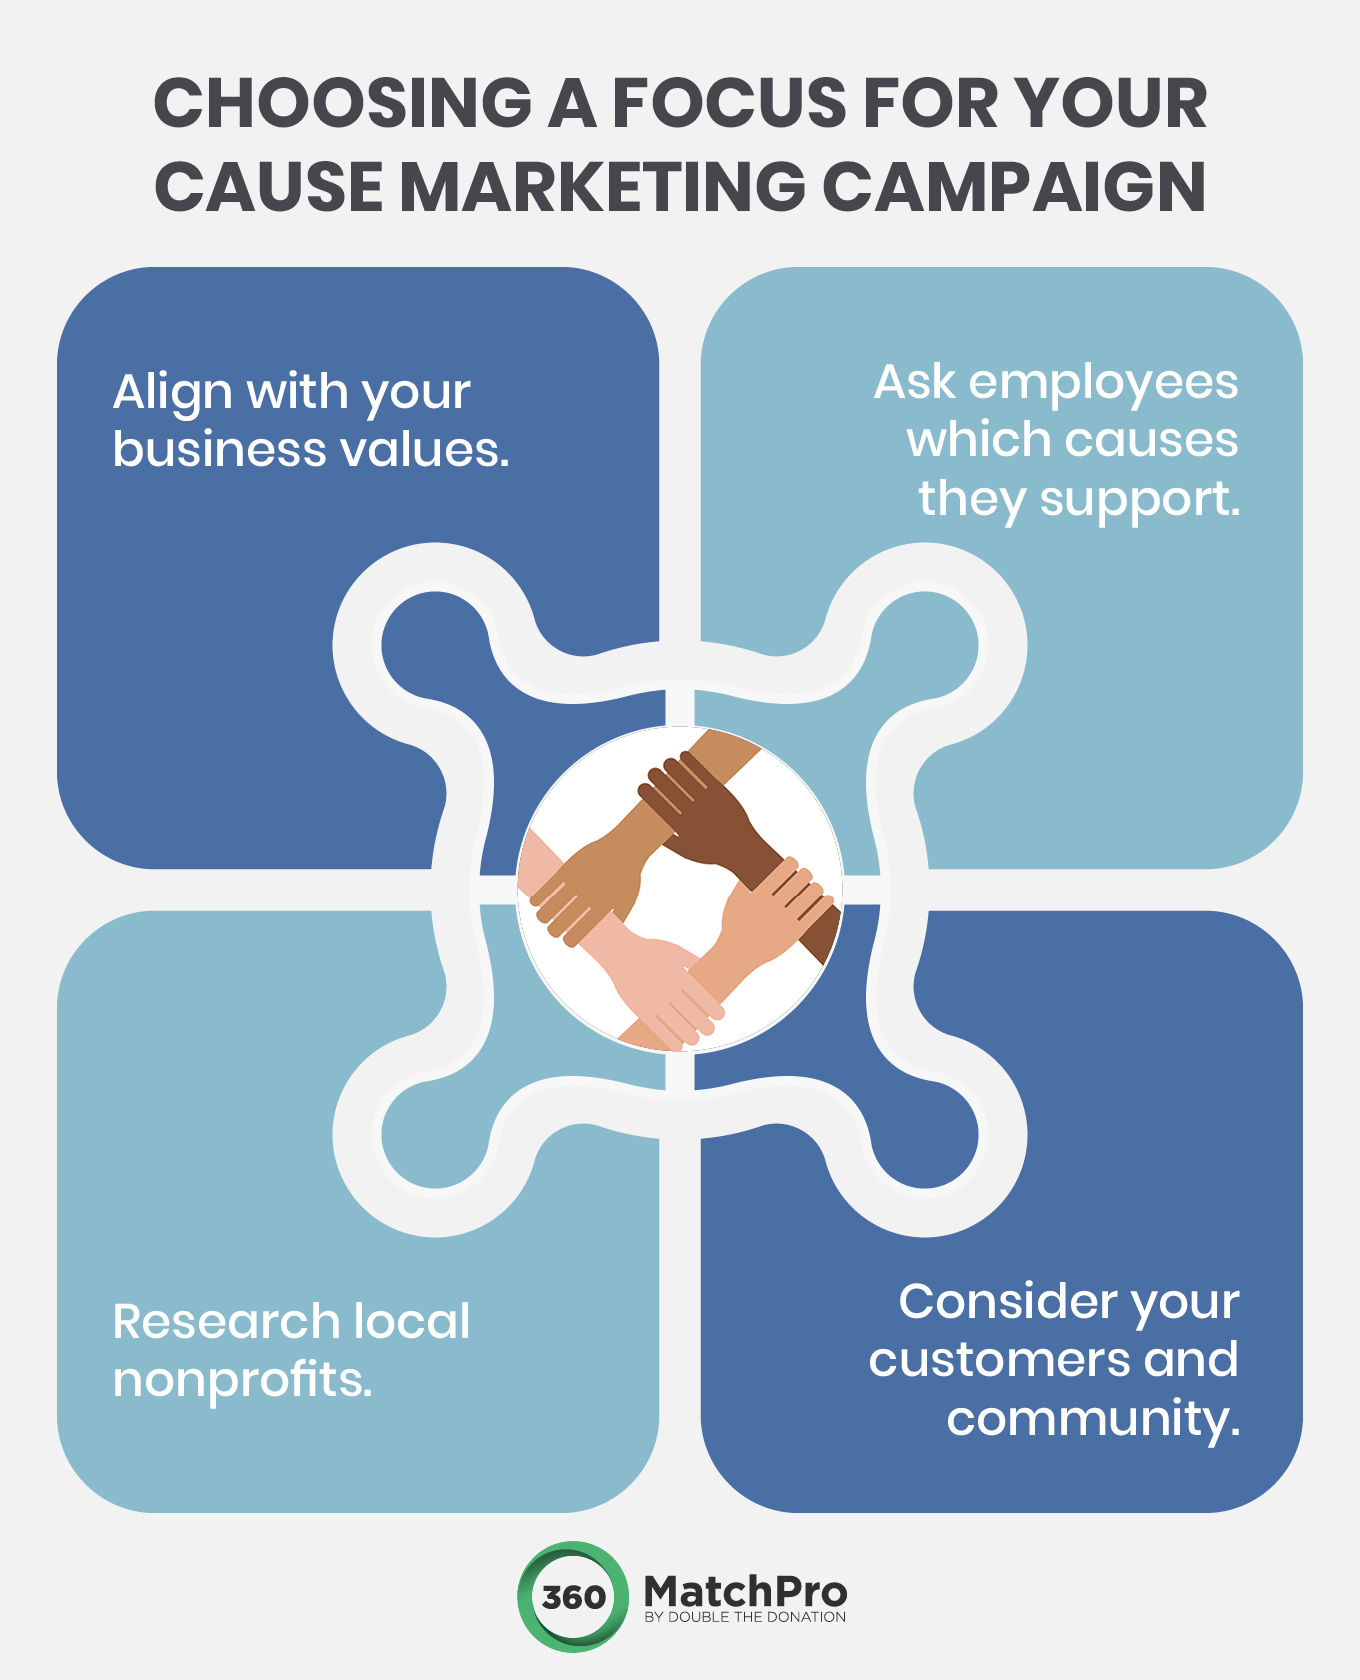 Four tips for selecting a focus or central issue for your business’s cause marketing campaign (detailed in the text below).